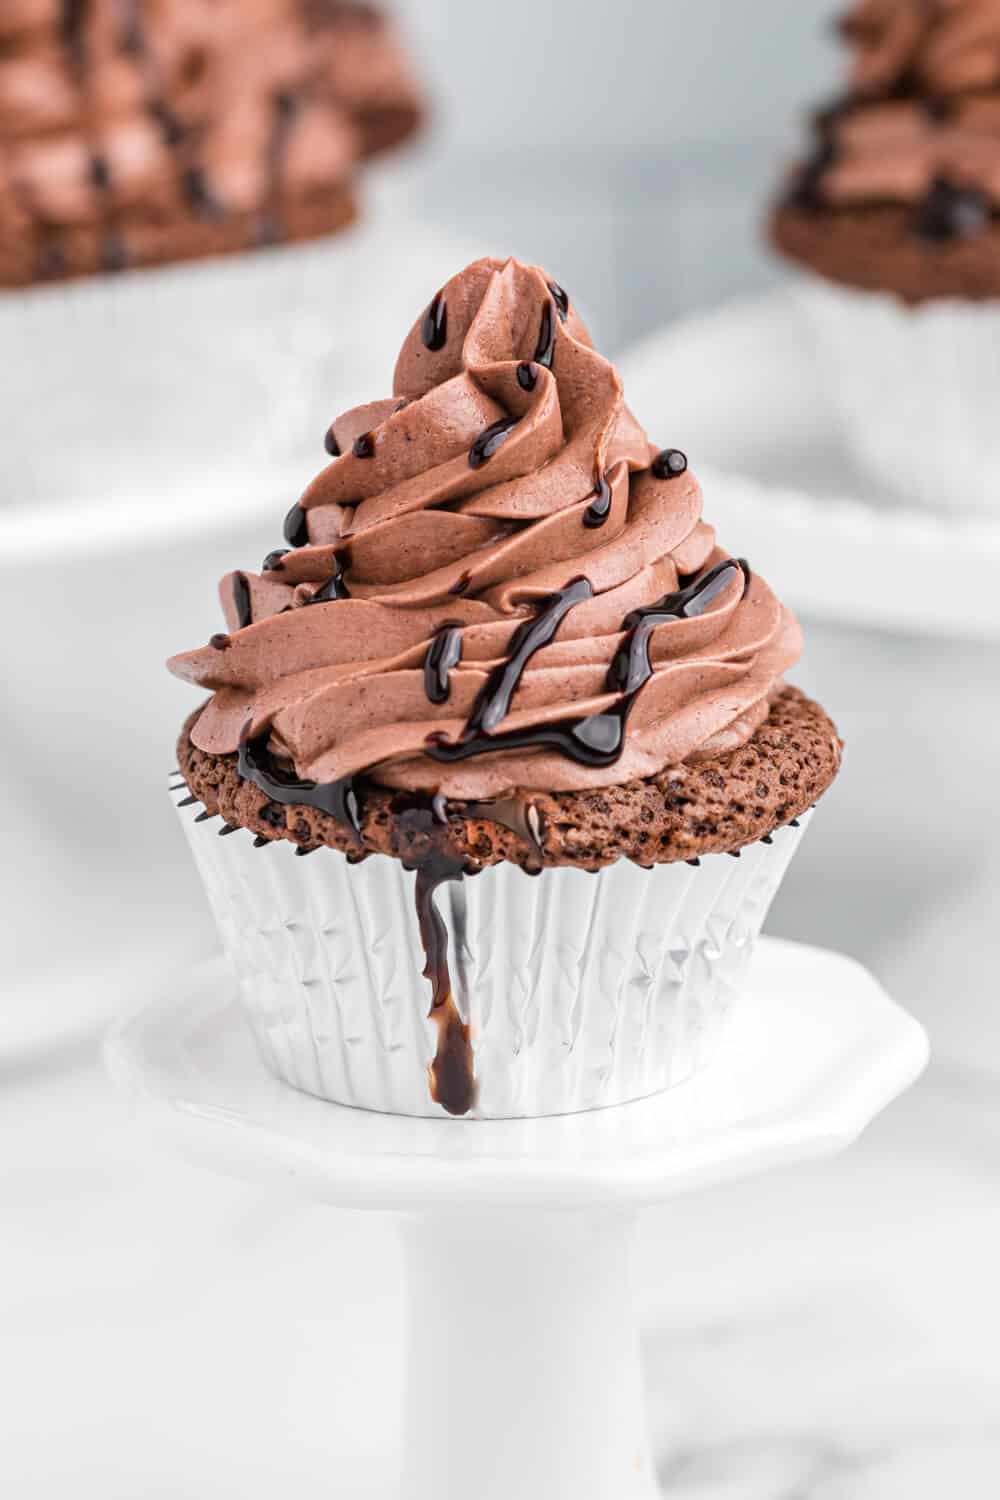 Death by chocolate cupcake on a cupcake stand